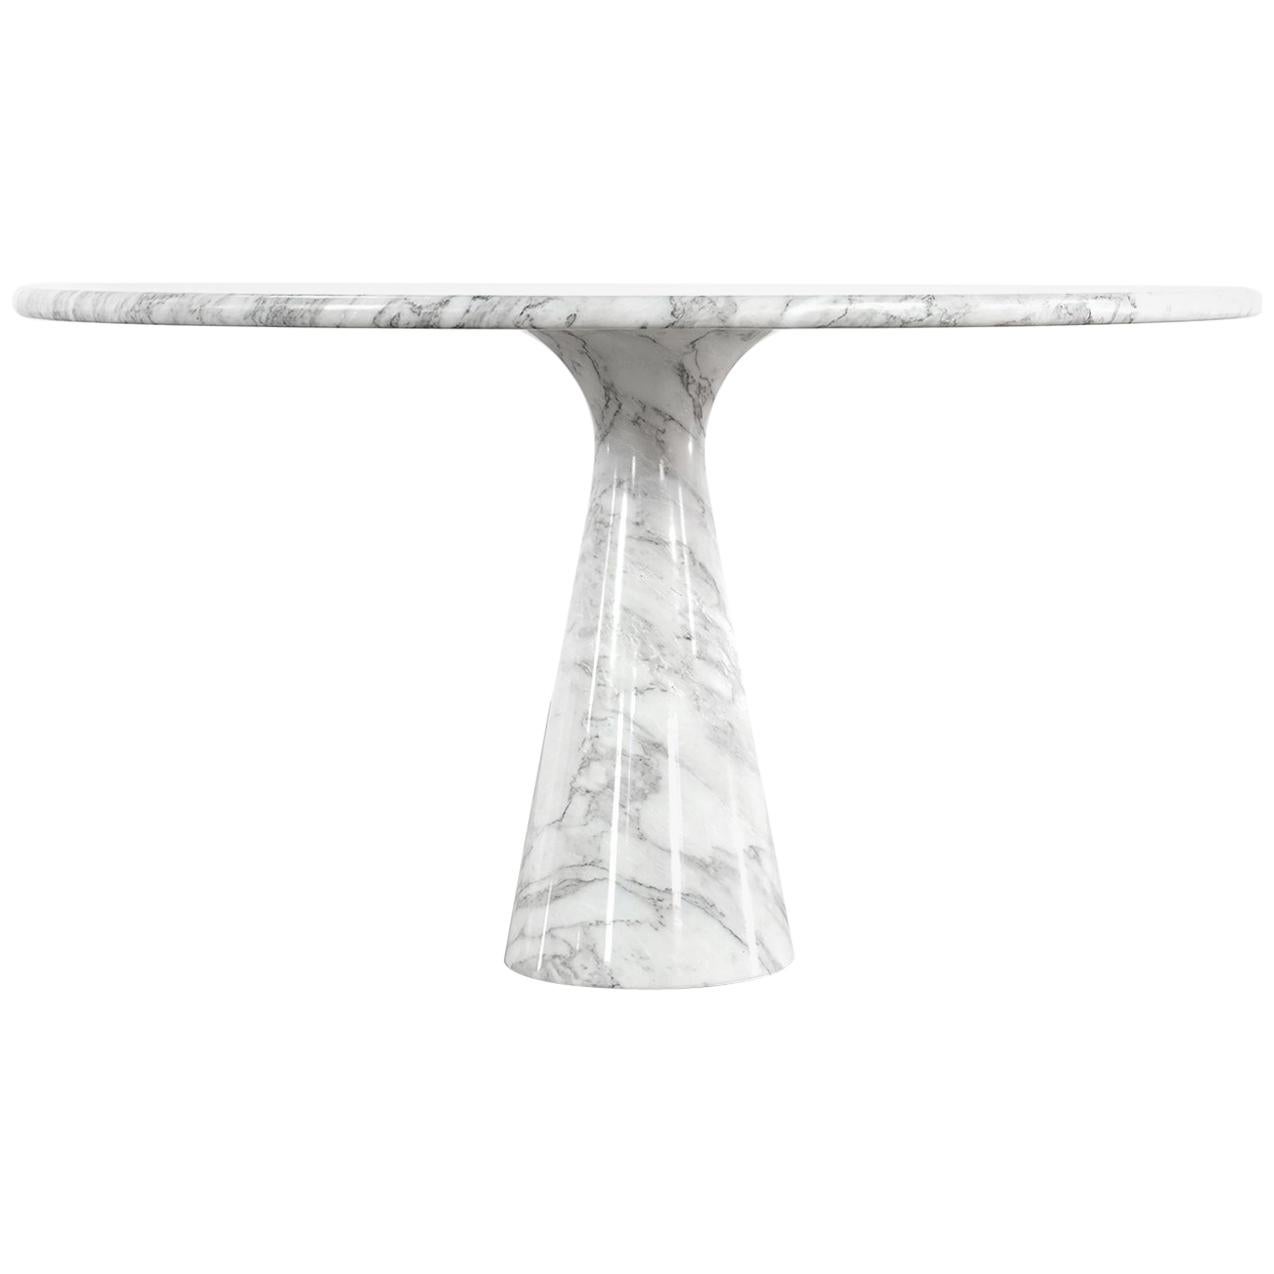 Angelo Mangiarotti Marble Dining Table  1972 by Skipper, Italy